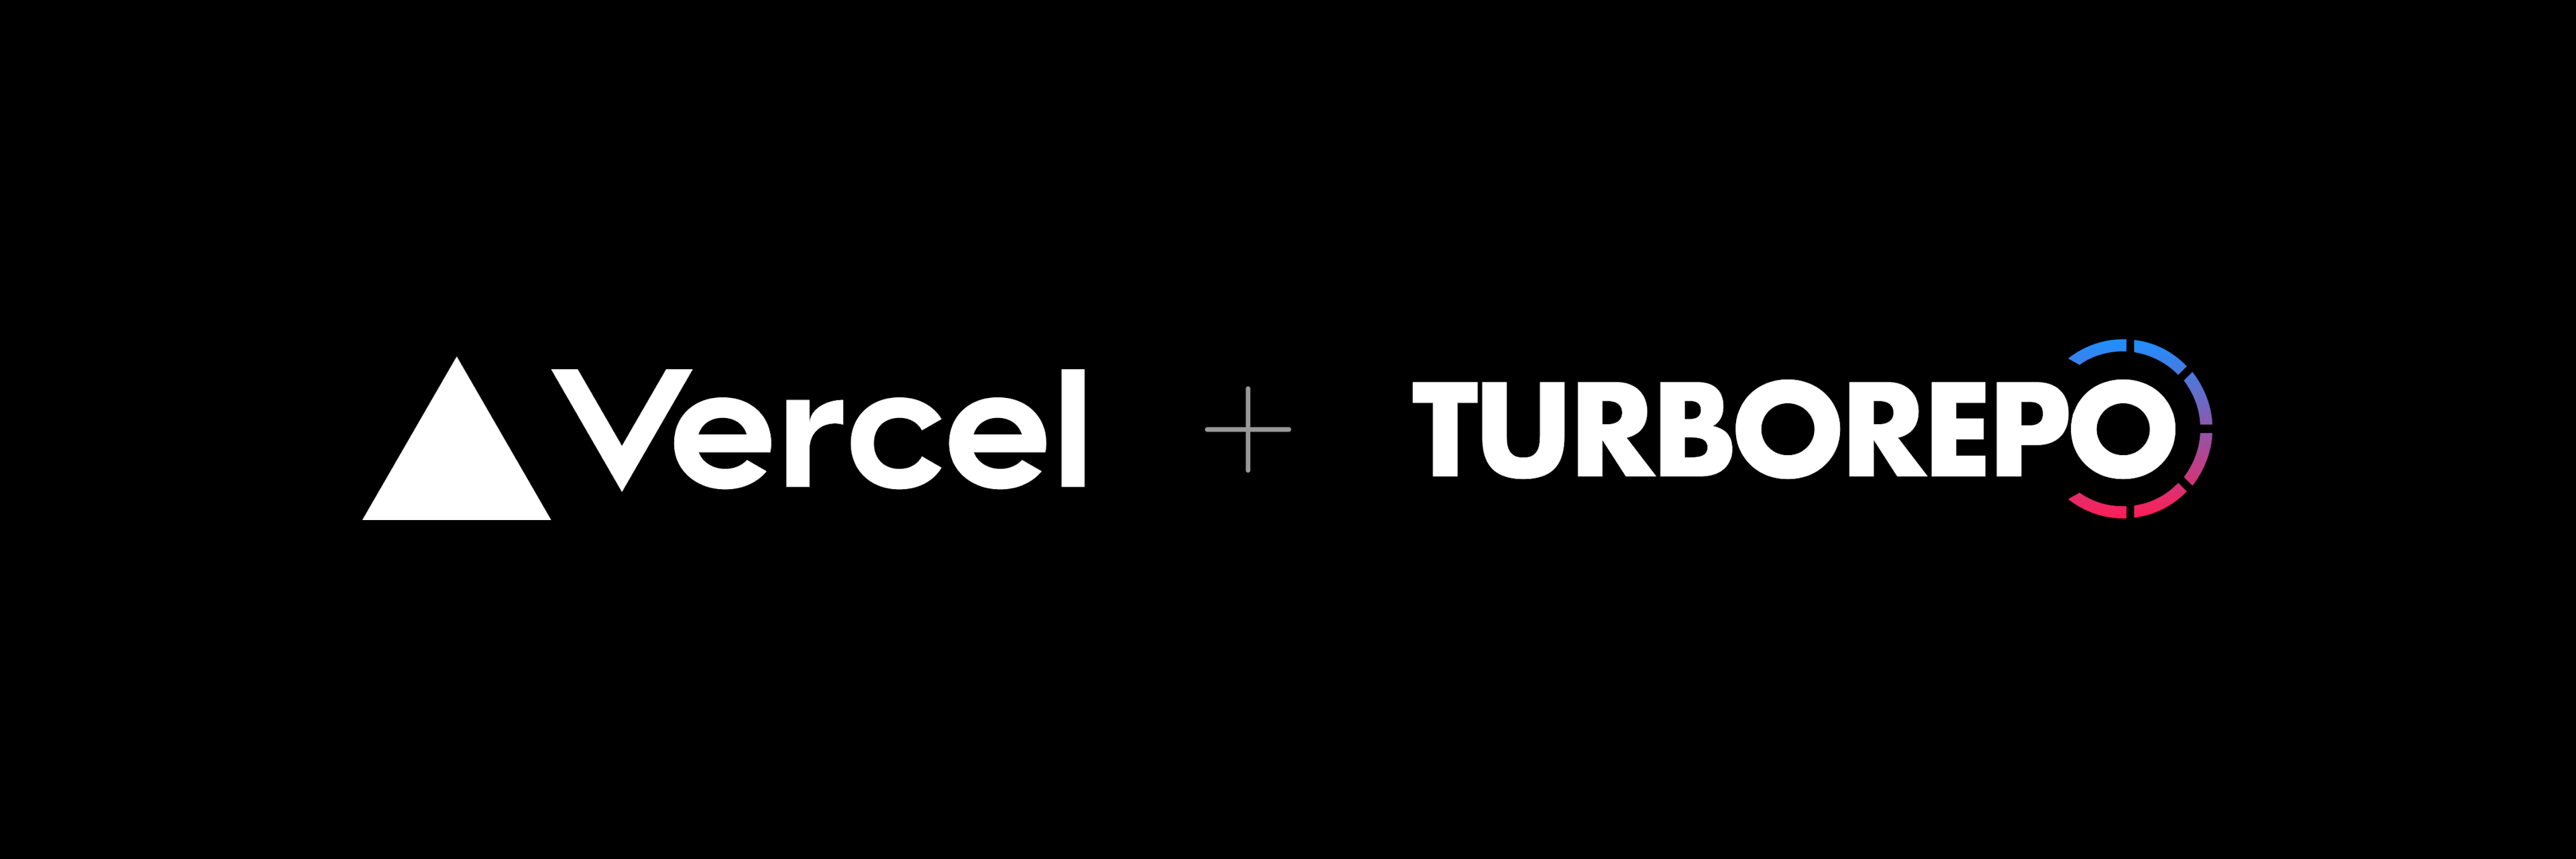 Announcing Vercel's acquisition of Turborepo, a powerful build system for JavaScript and TypeScript codebases.
